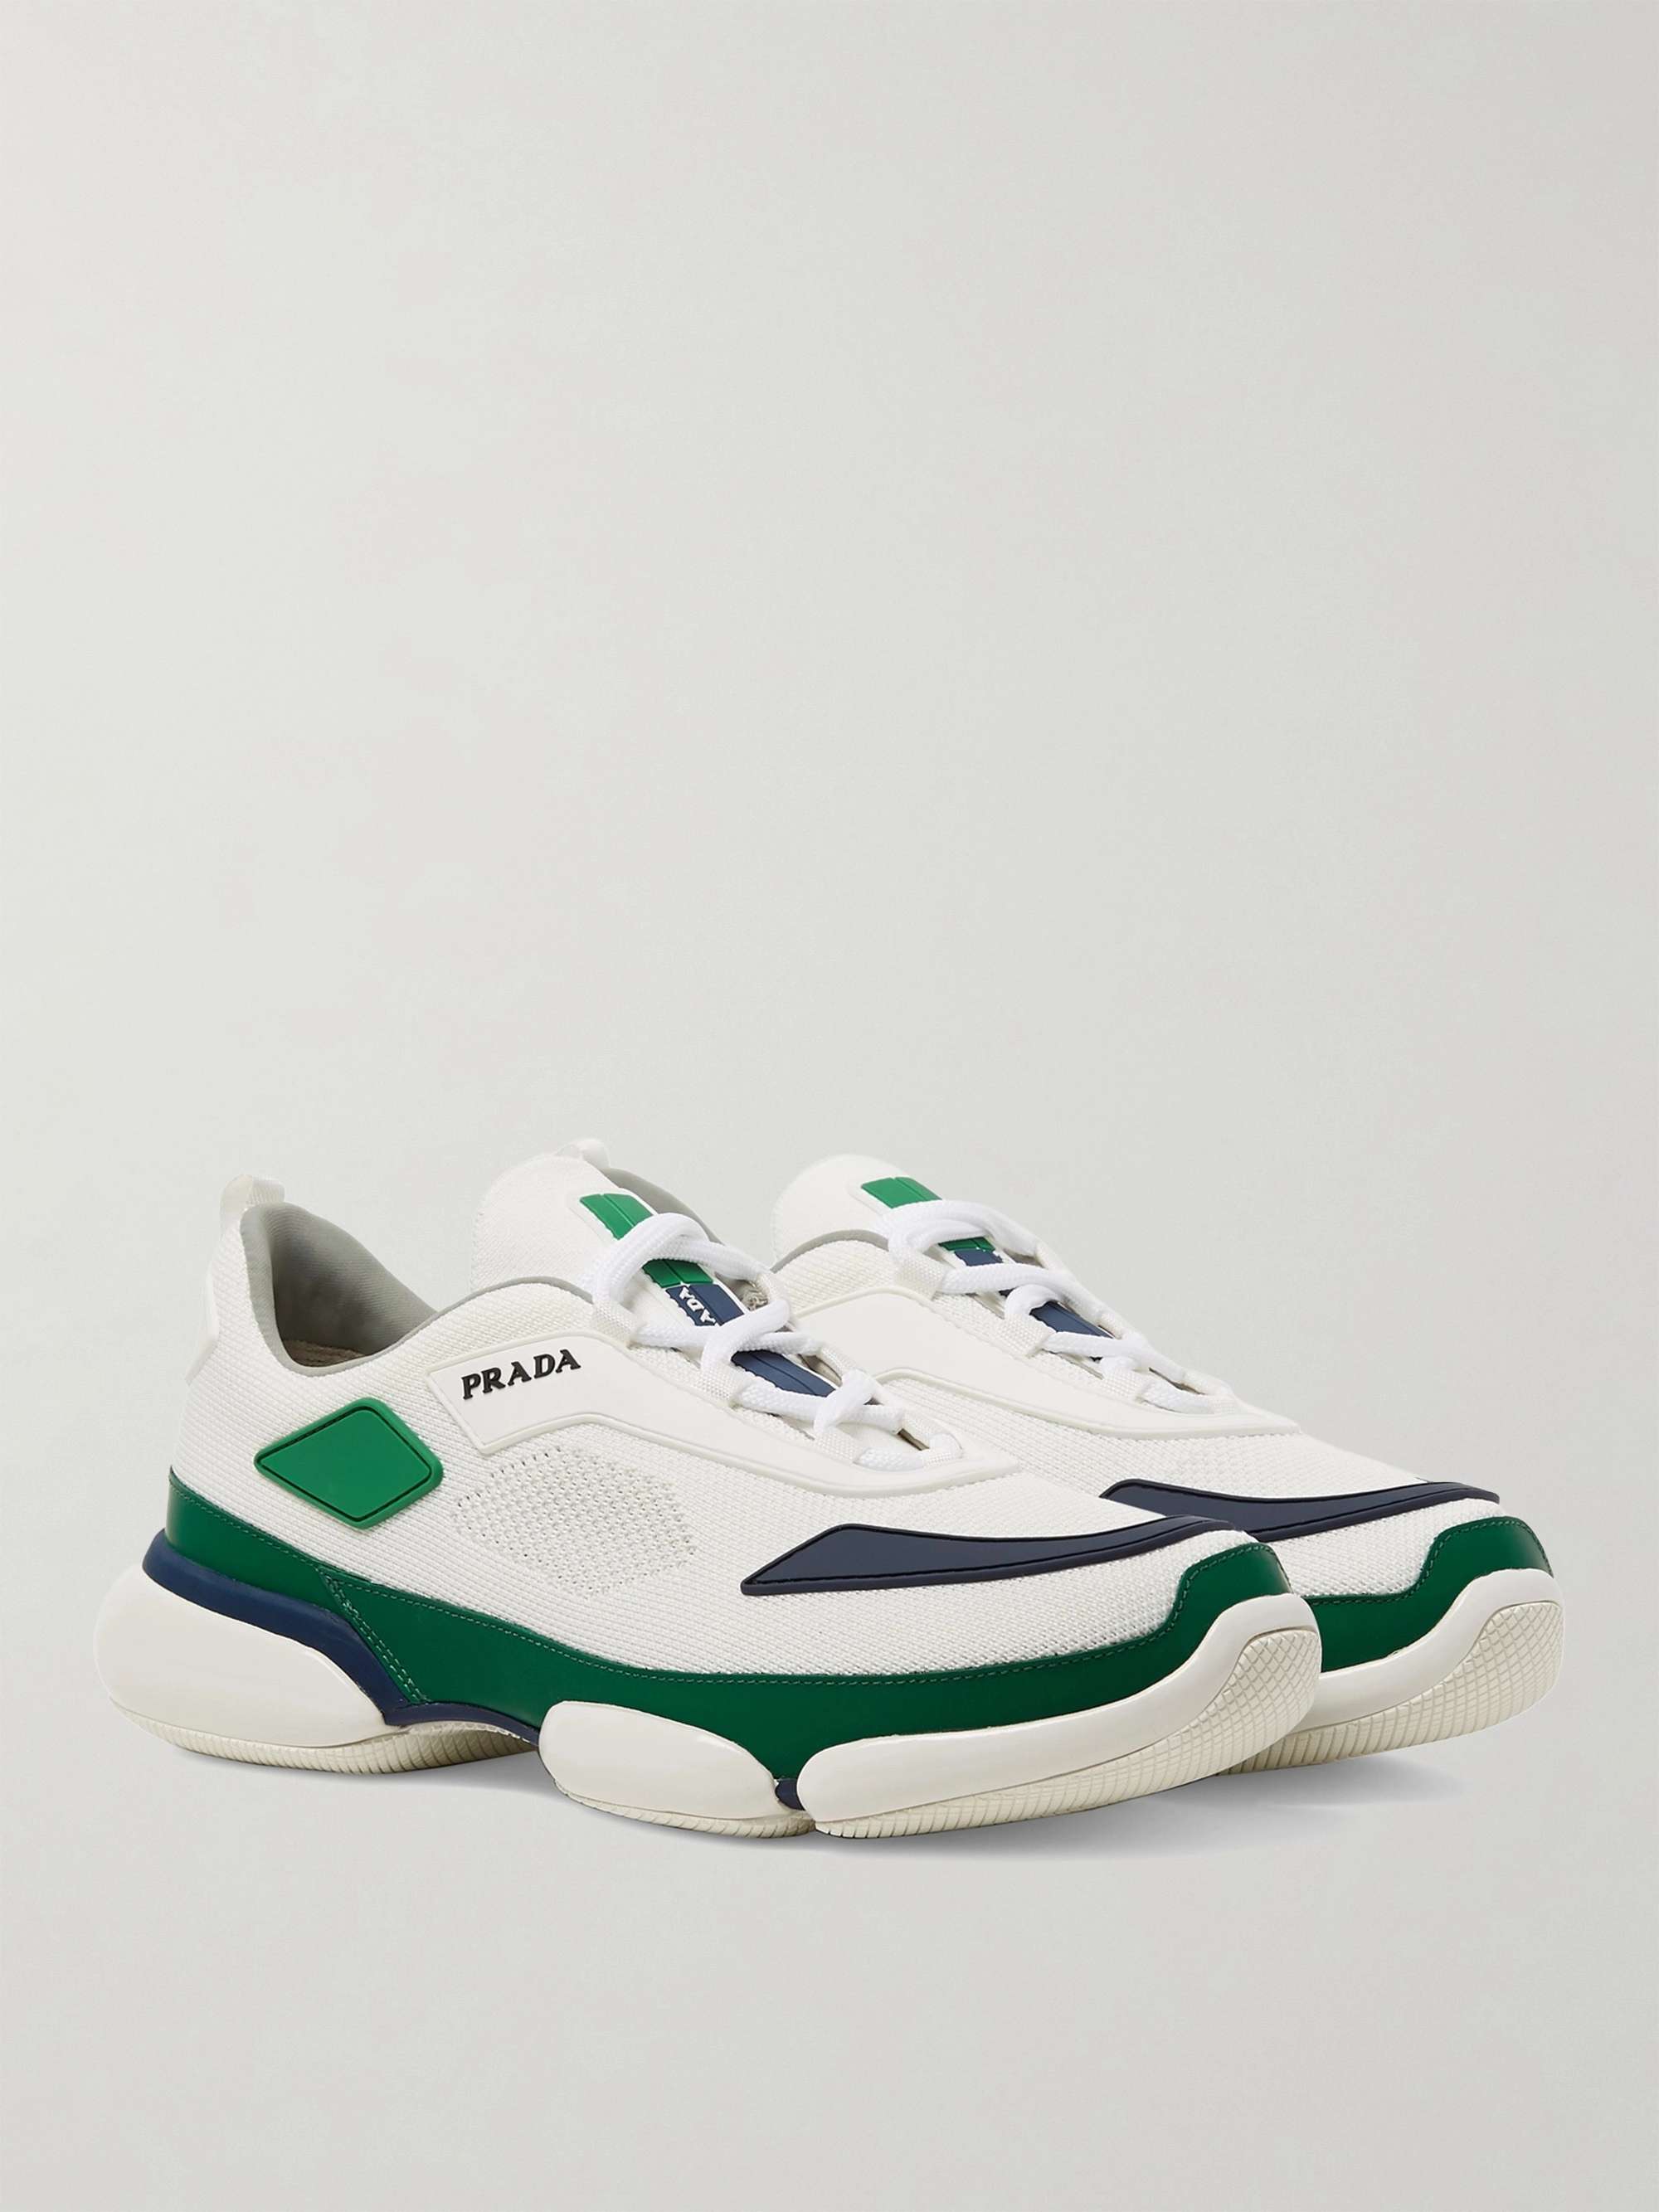 PRADA Cloudbust Mesh, Rubber and Leather Sneakers